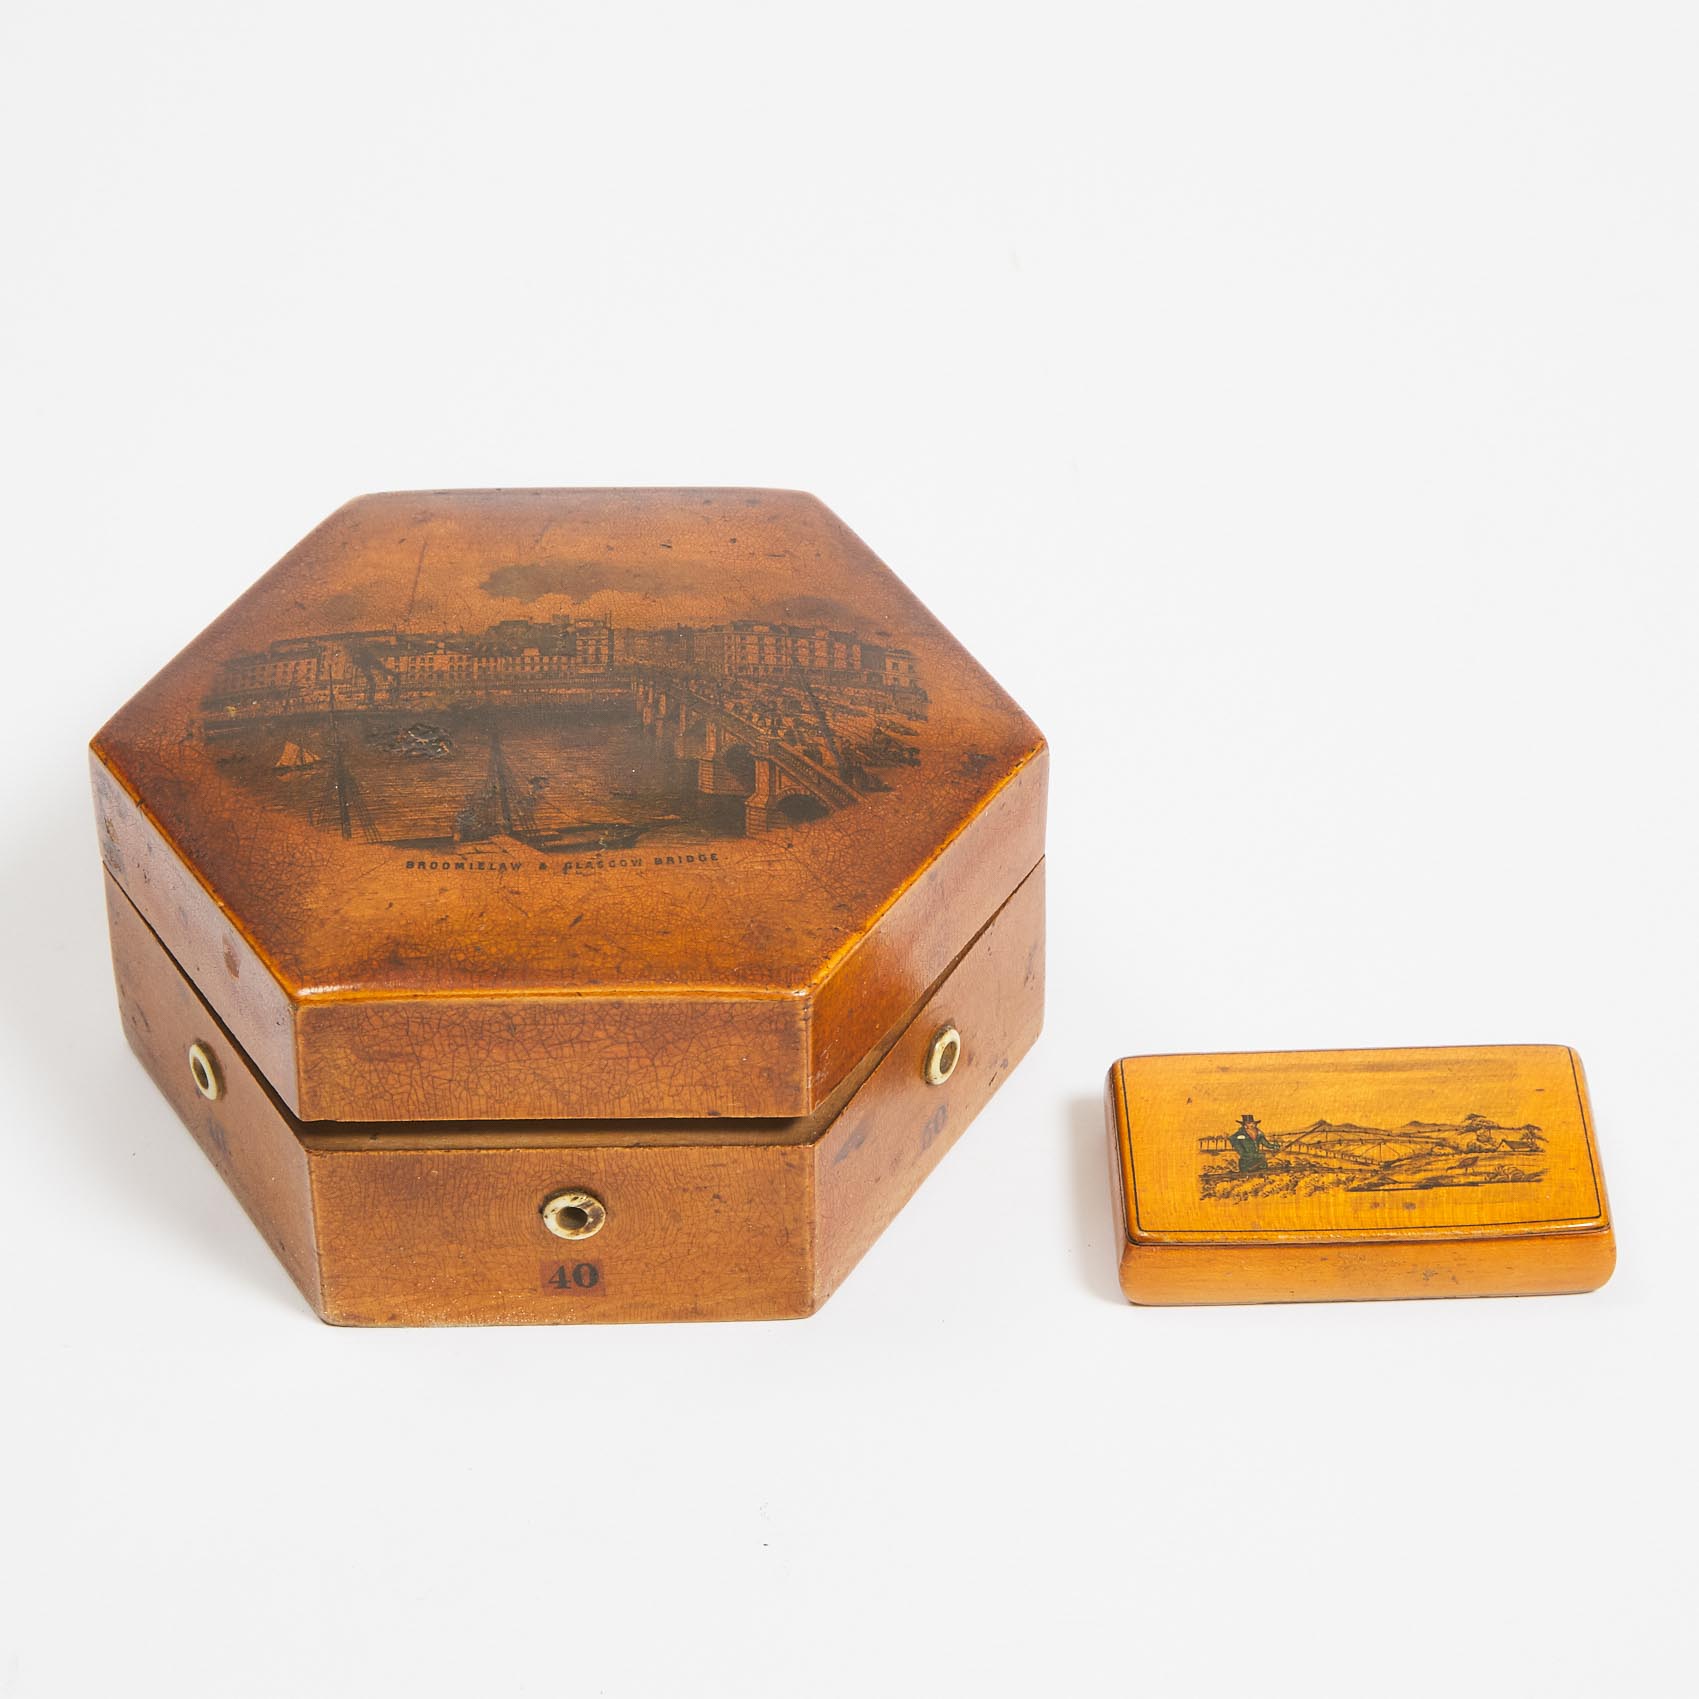 Sewing/Needlework Notions: Maucline Ware Octagonal Sycamore Thread Dispenser, 19th century